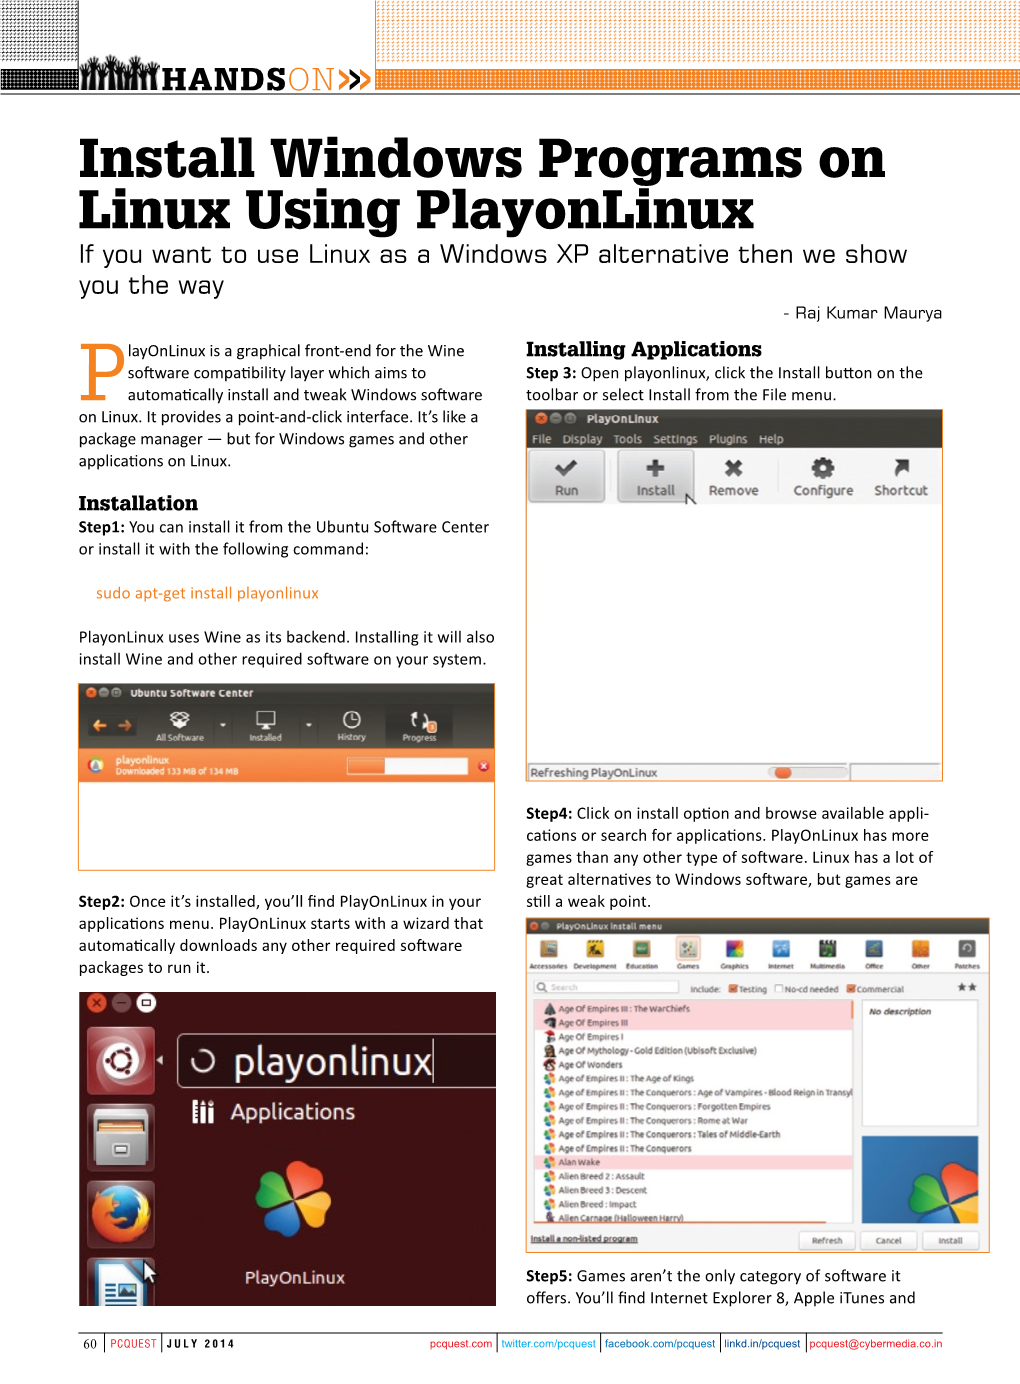 Install Windows Programs on Linux Using Playonlinux If You Want to Use Linux As a Windows XP Alternative Then We Show You the Way - Raj Kumar Maurya